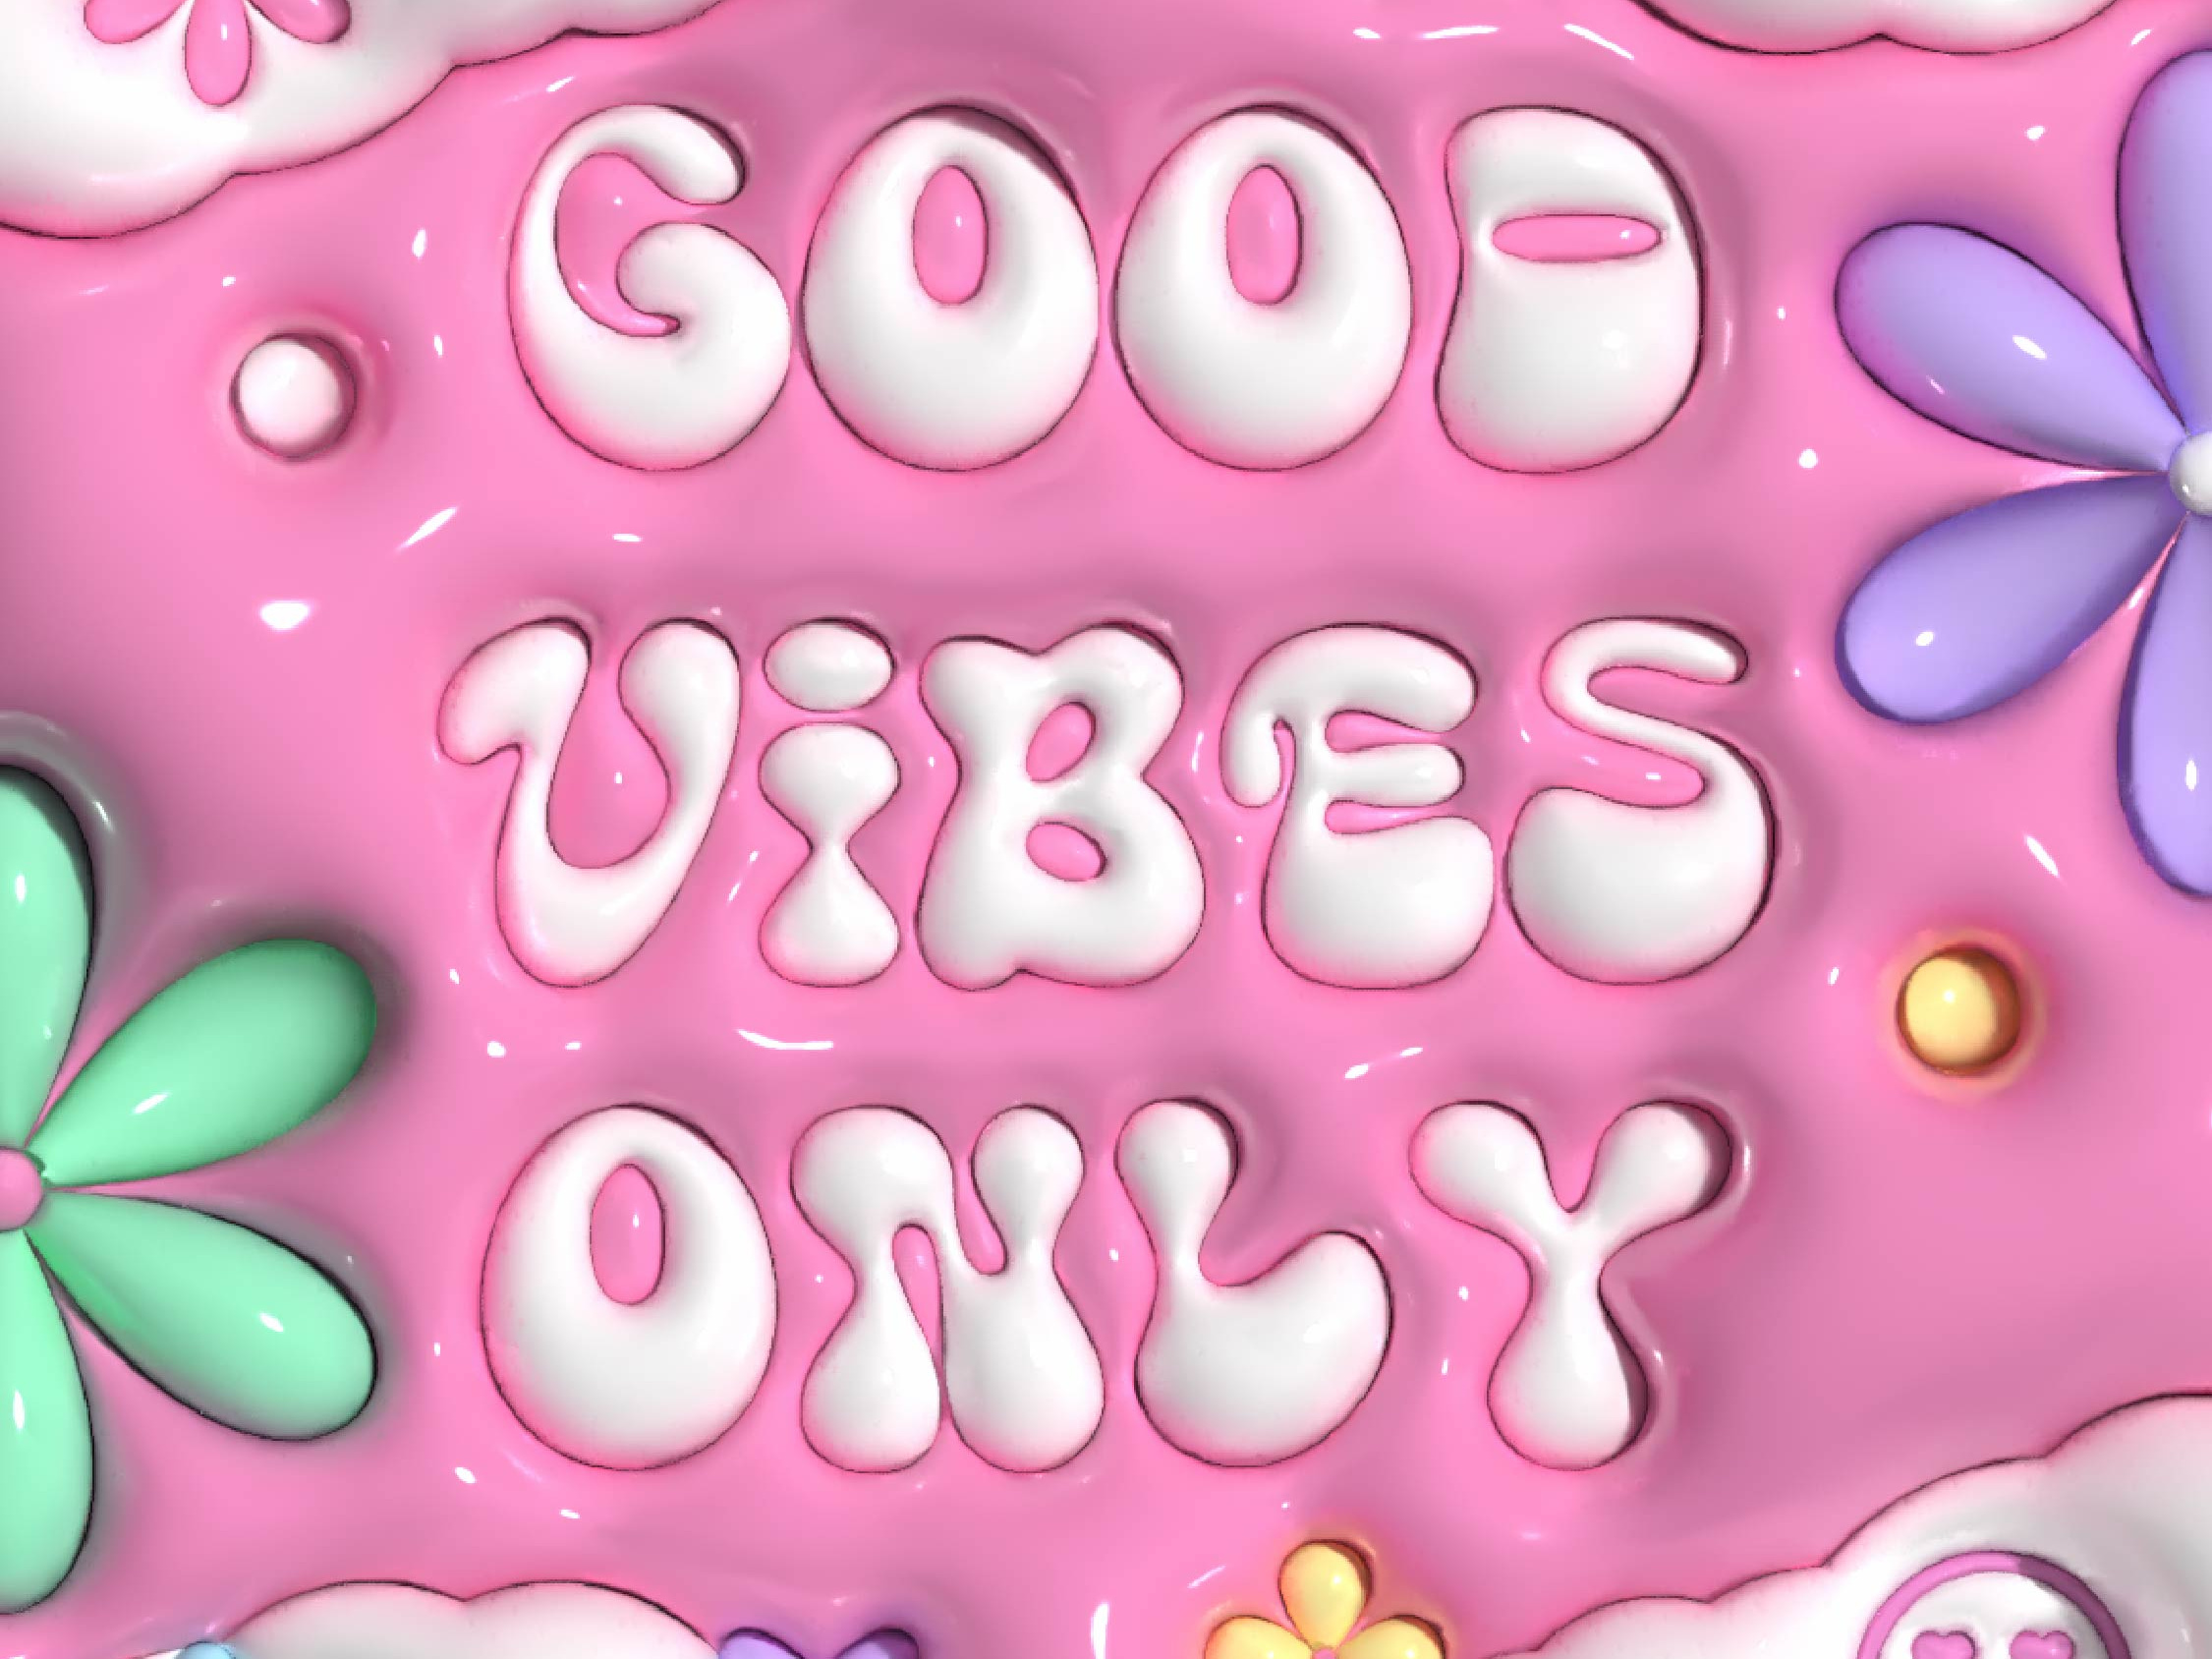 Good vibes only  3D wallpaper by Raimgul Gainullina on Dribbble